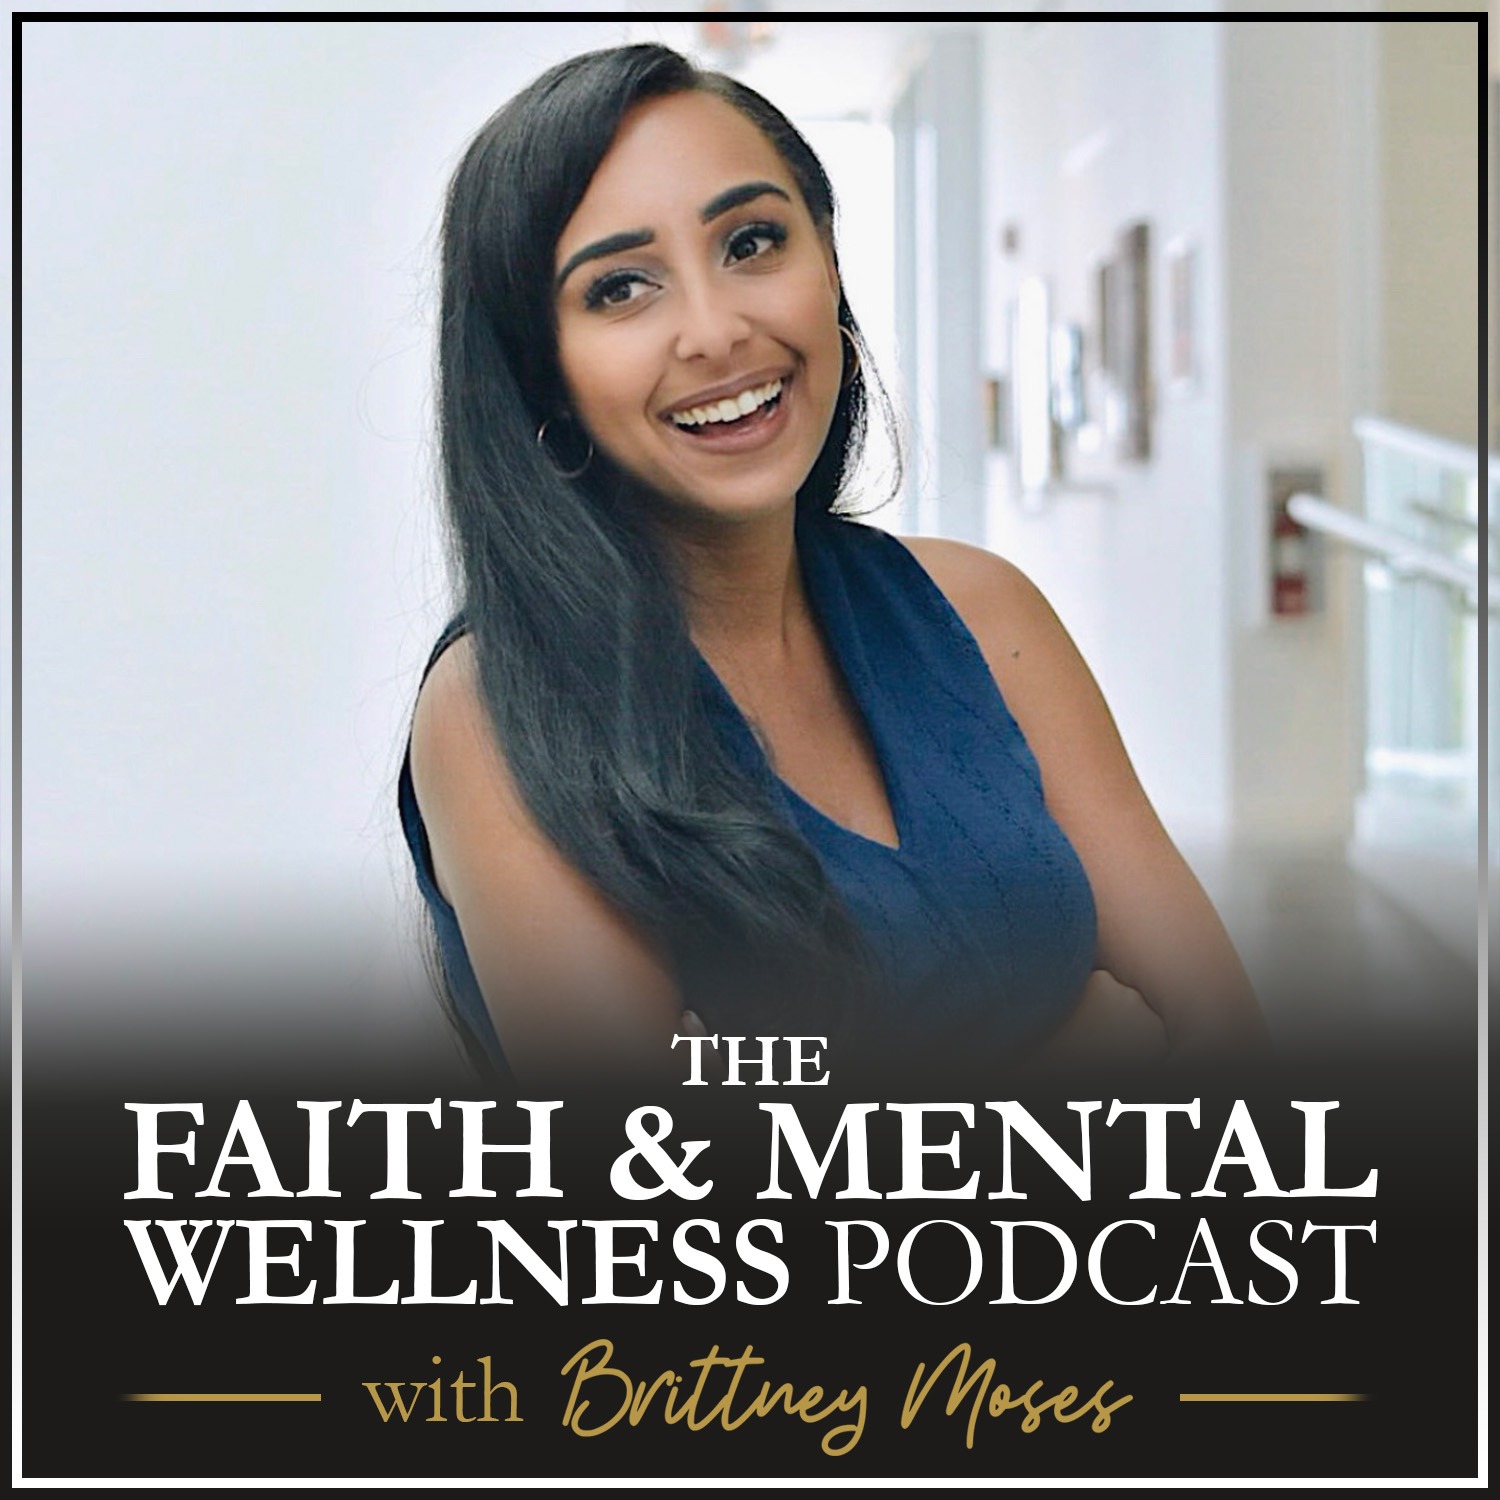 053: Mental Health Basics: The Signs & Treatments for Depression with Dr. Diana Samuel